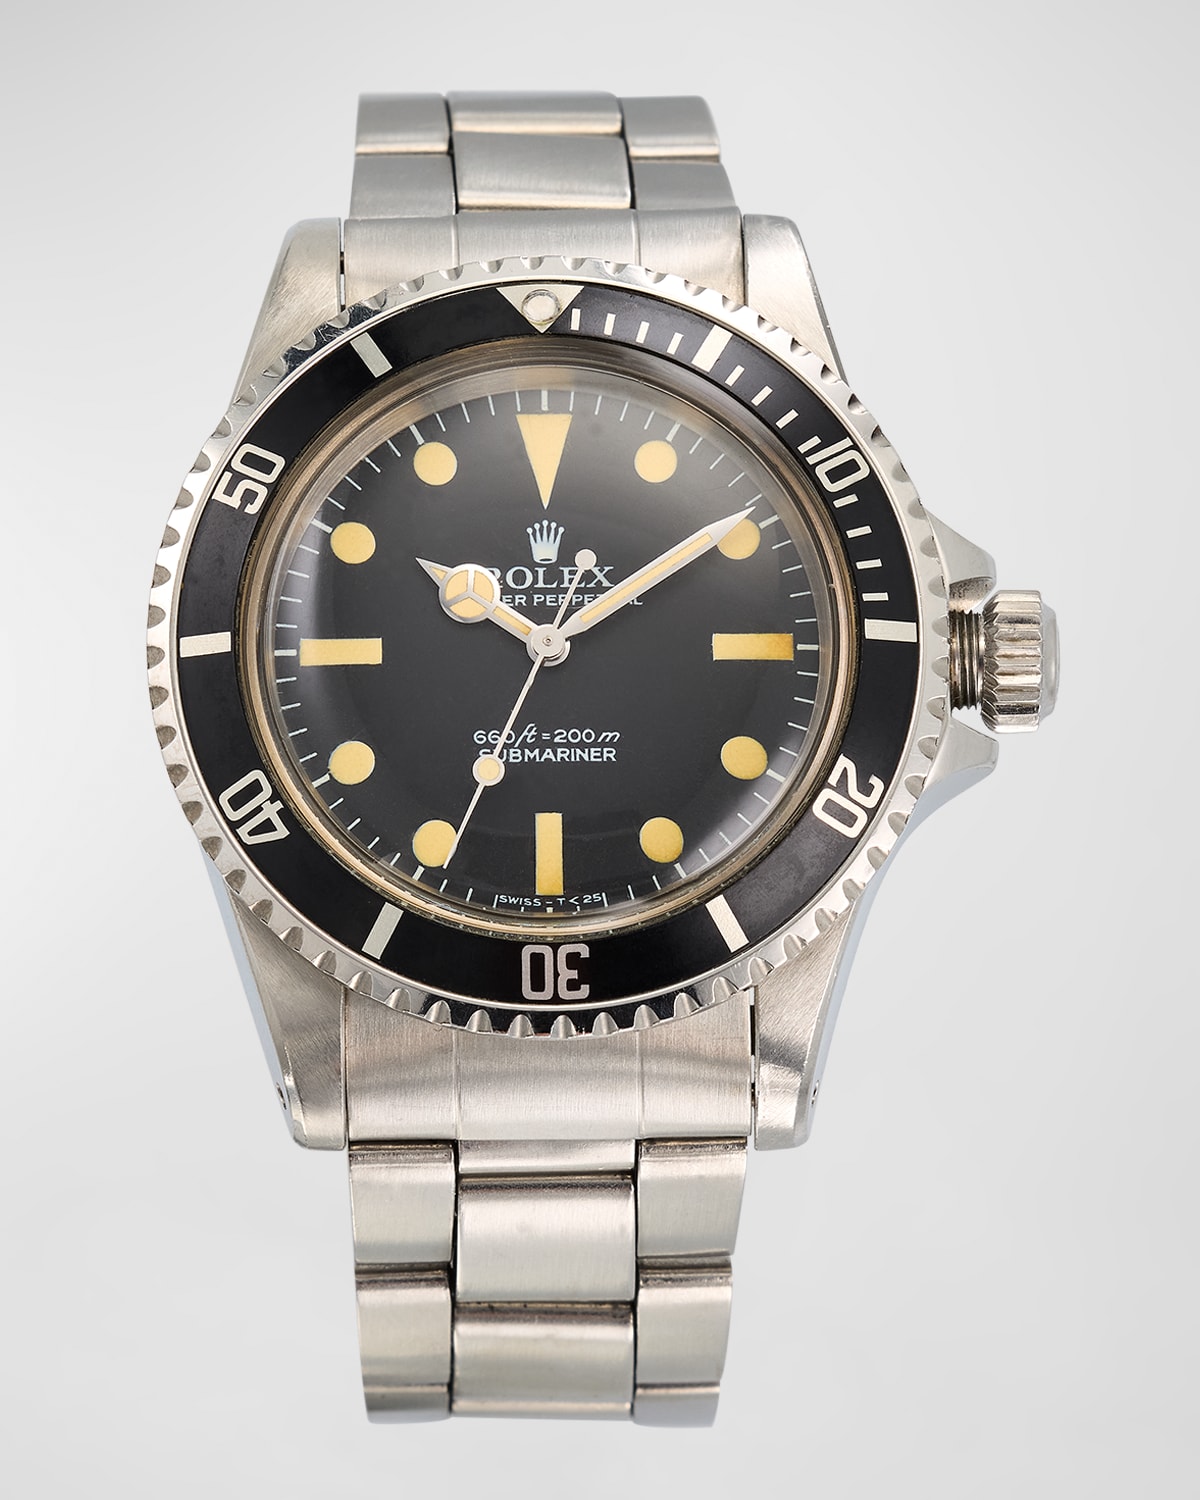 Vintage Watches Rolex Oyster Perpetual Submariner 40mm Vintage 1977 Watch In Metallic